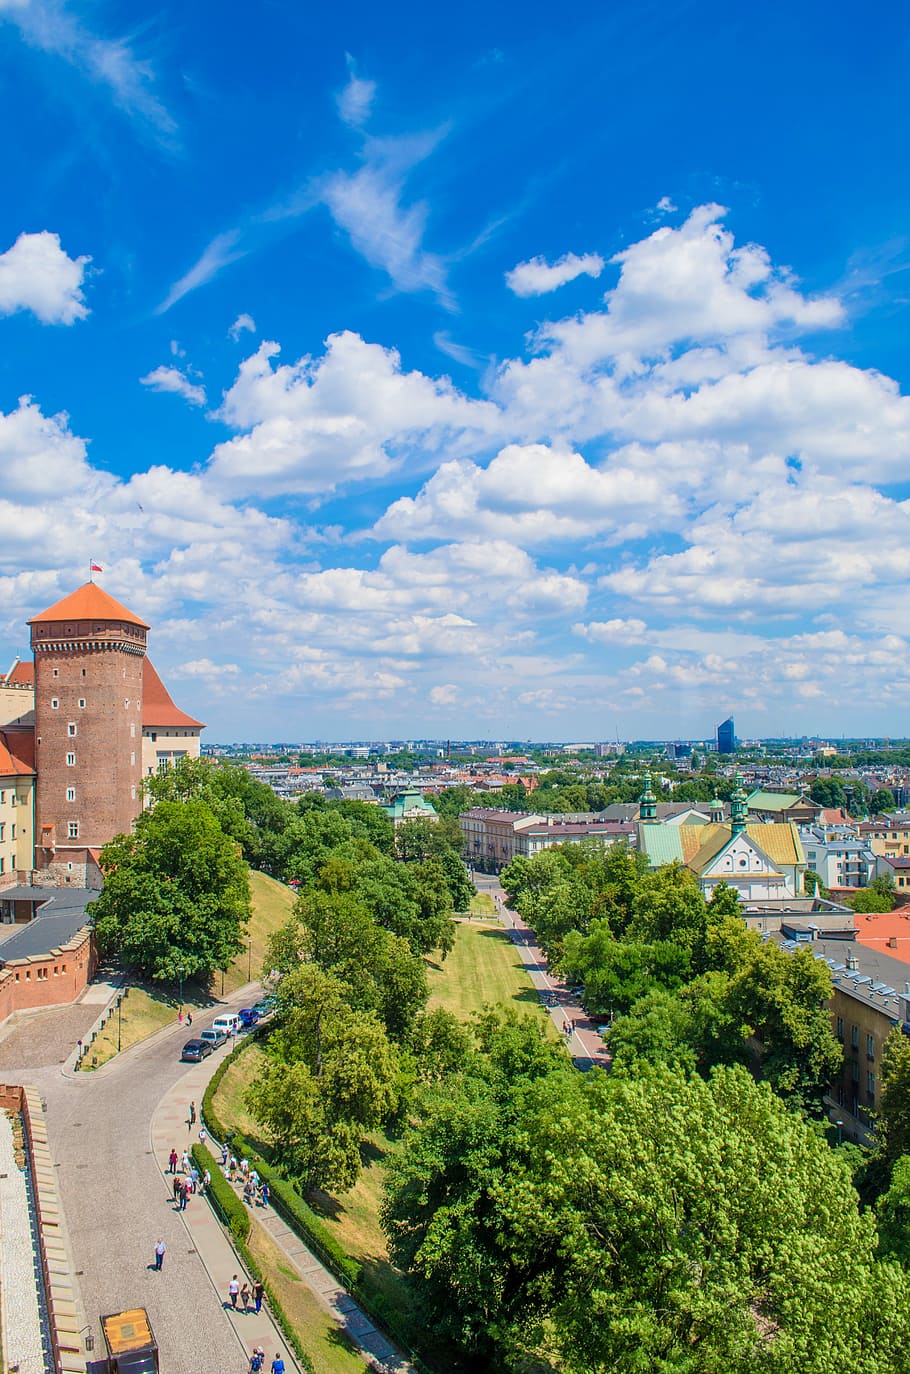 krakow, poland, europe, wawel, castle, fortress, tower, river, historical, museum